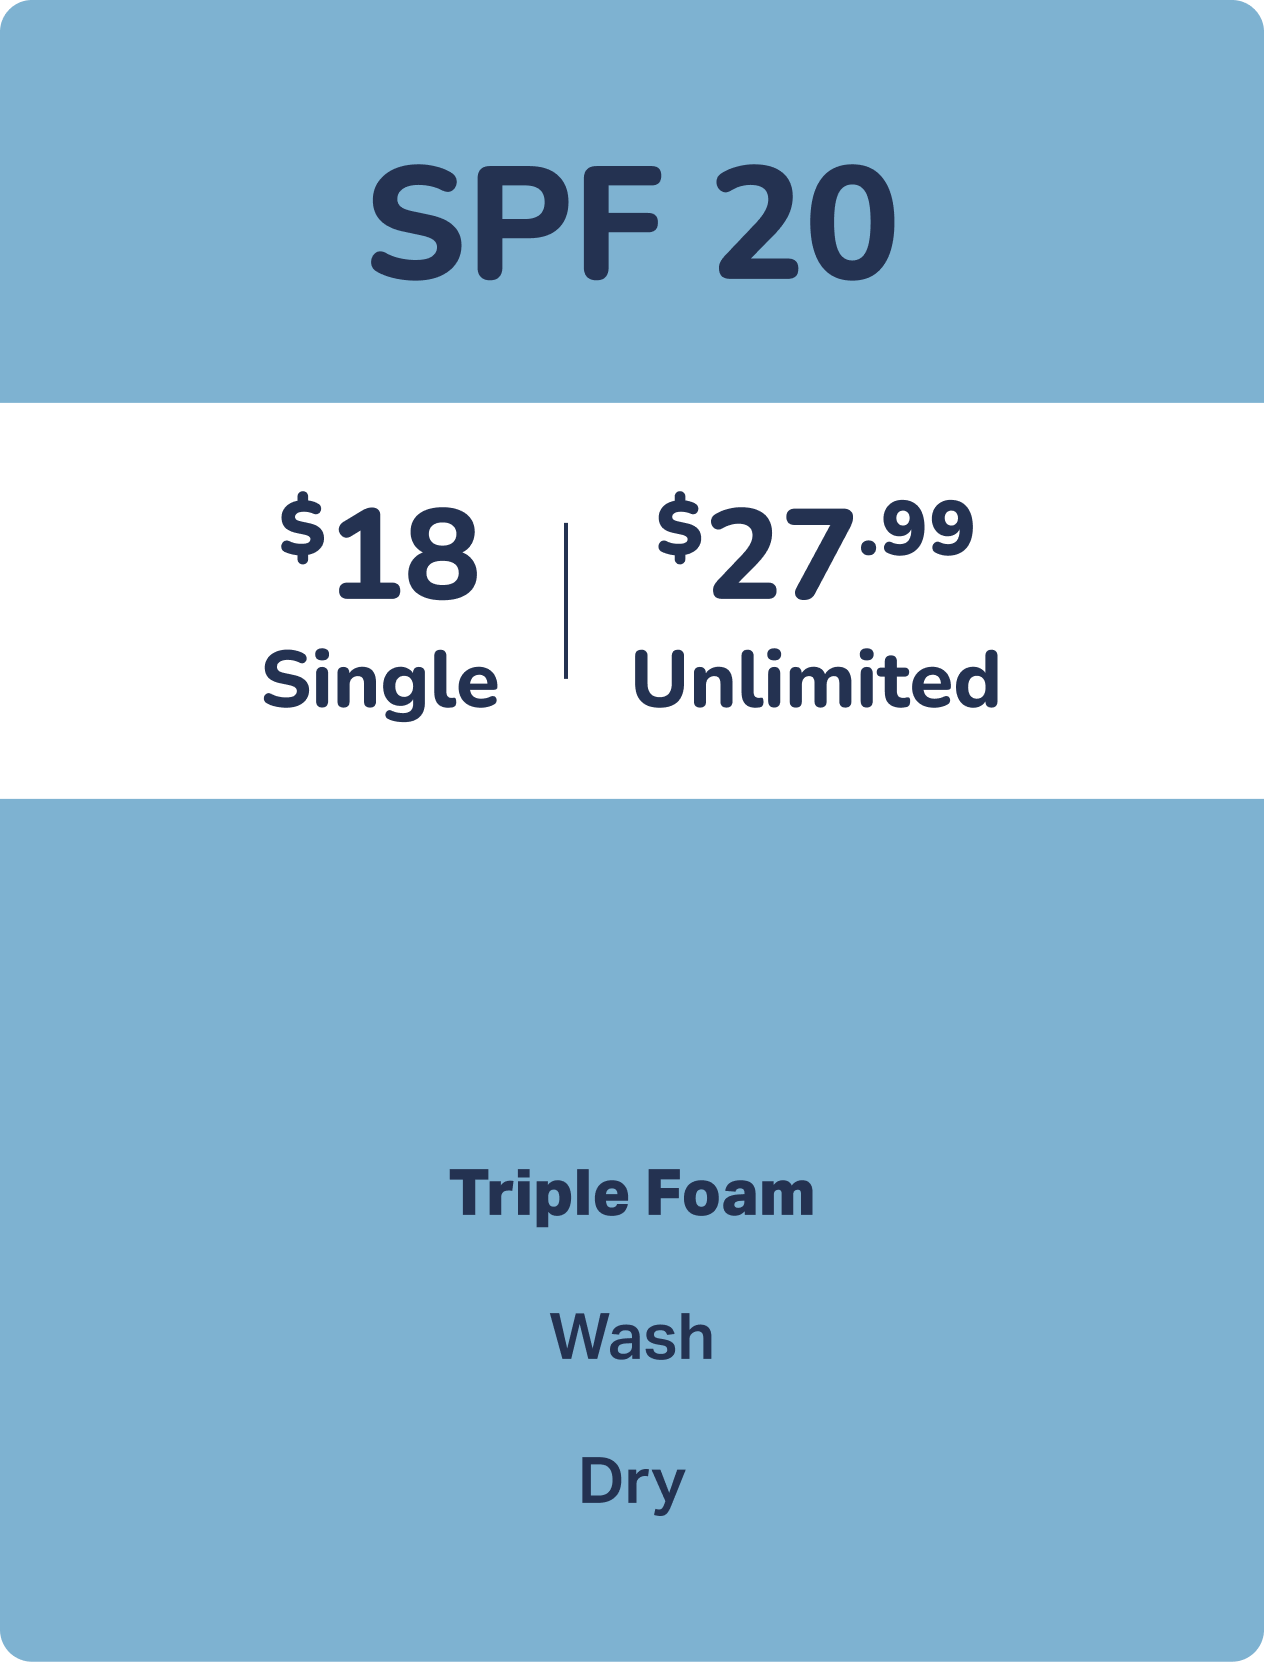 SPF 20 level Wash Package